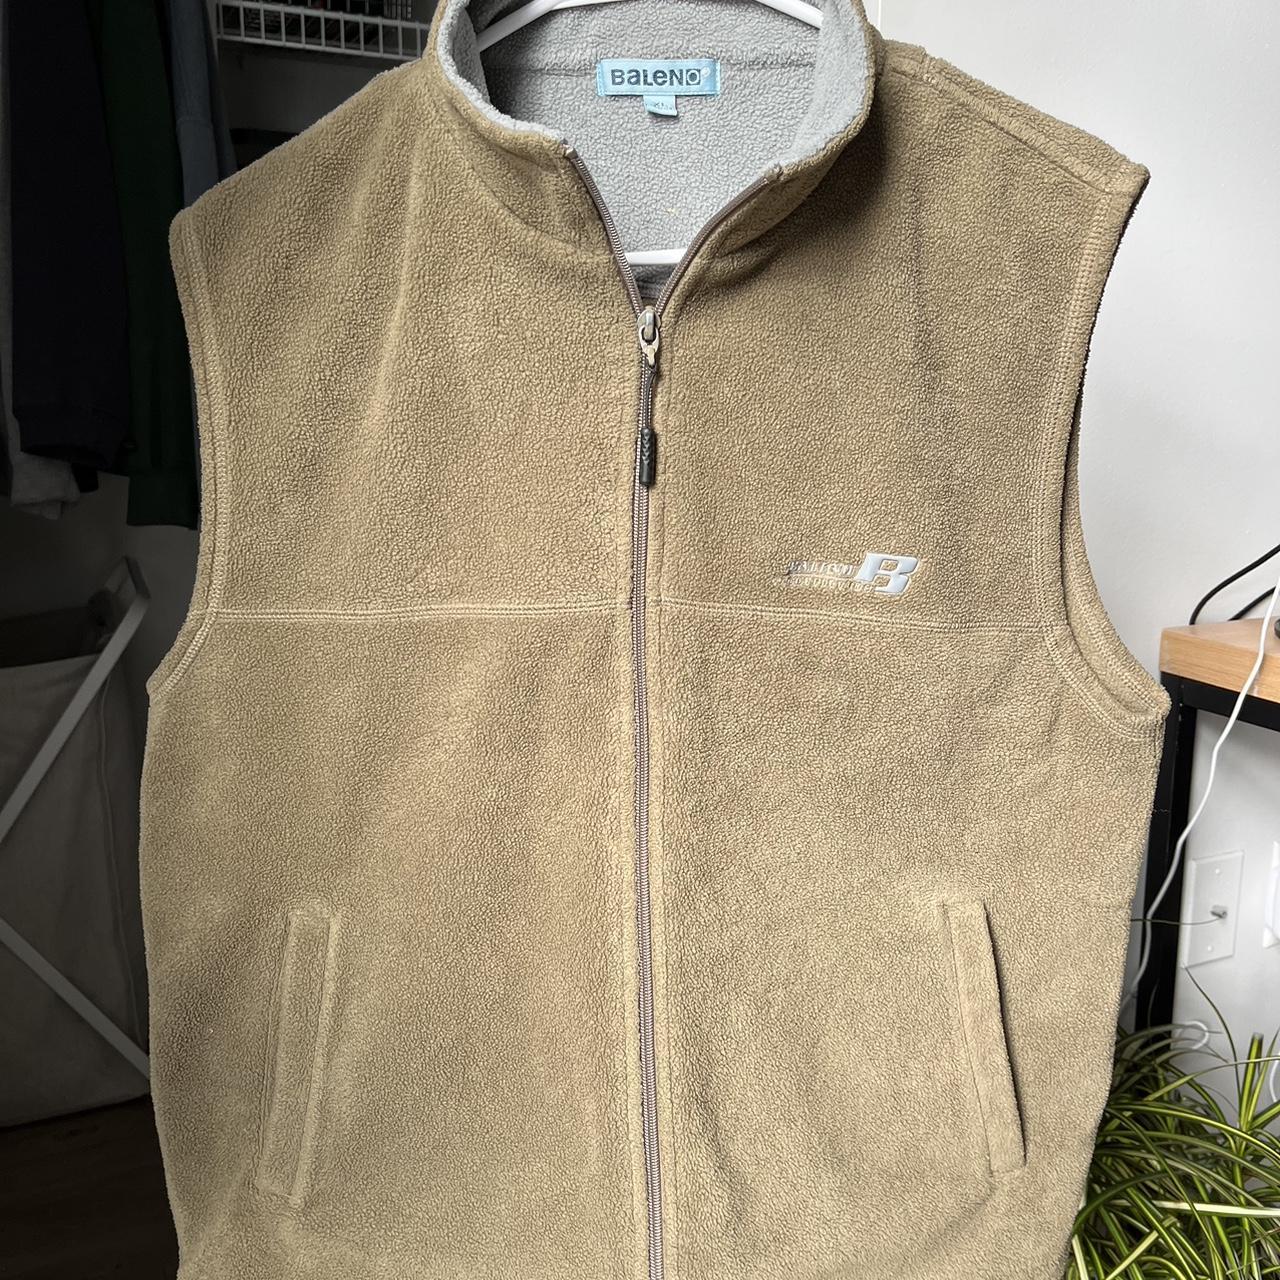 Awesome brown fleece vest Great fit and color - Depop